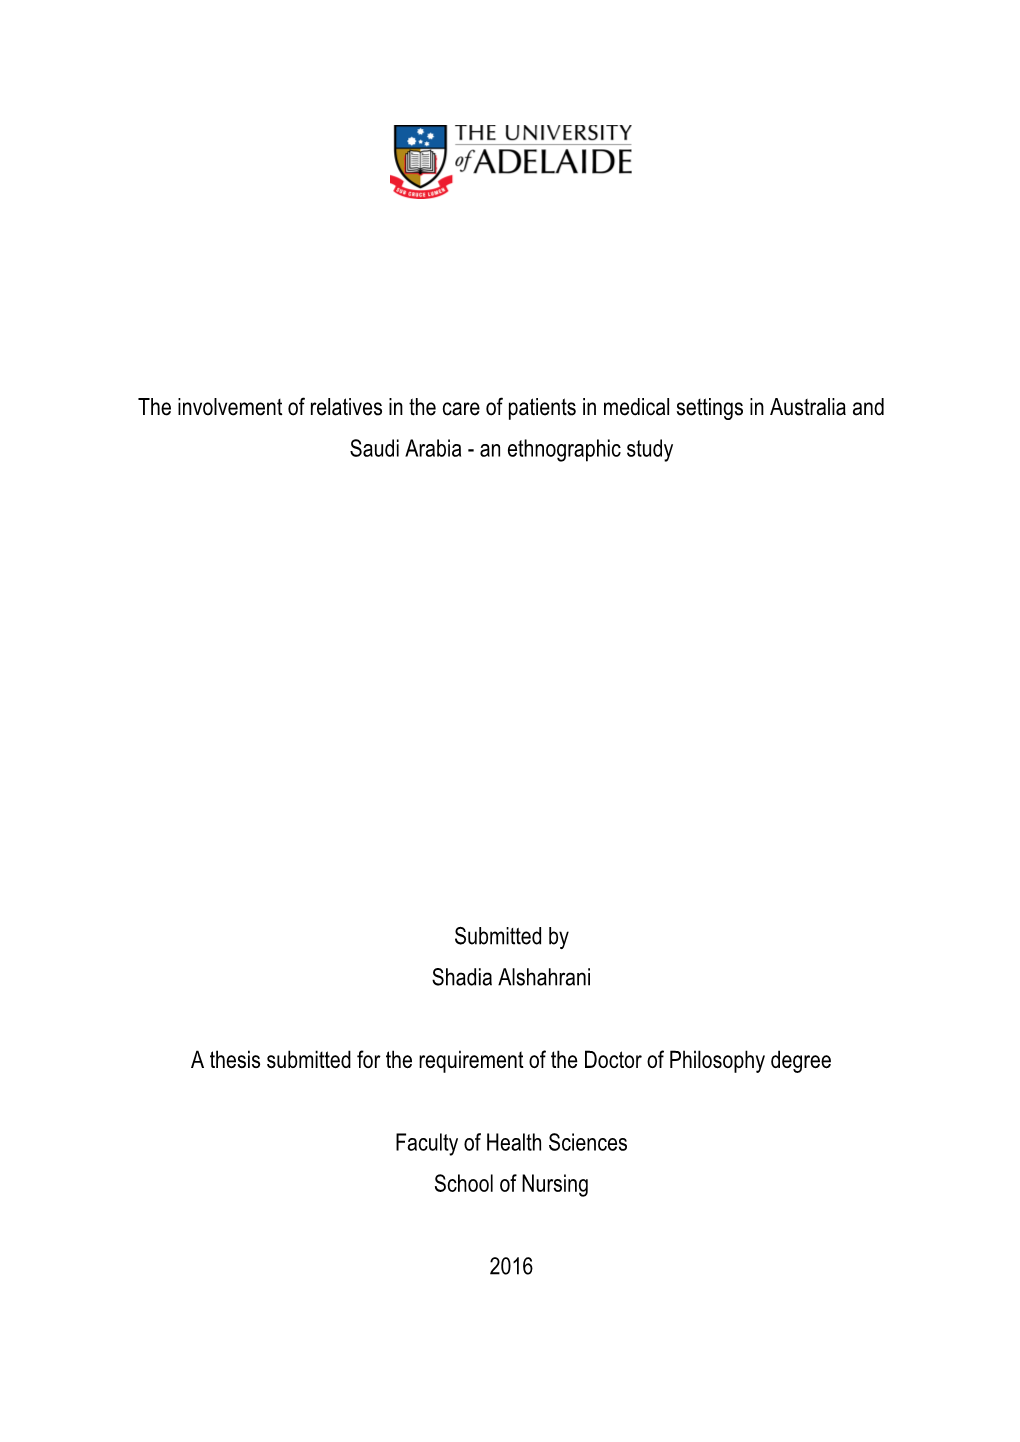 The Involvement of Relatives in the Care of Patients in Medical Settings in Australia and Saudi Arabia - an Ethnographic Study